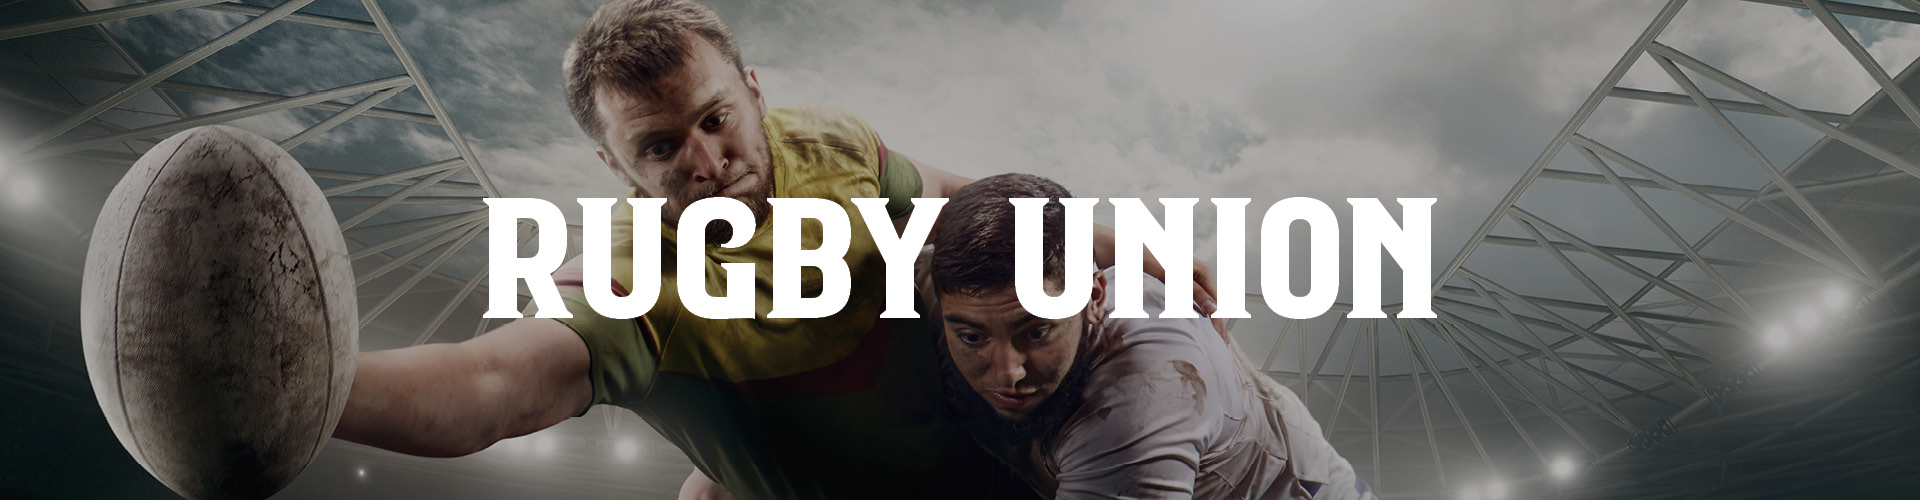 Watch Live Rugby Union at your local Great UK Pub